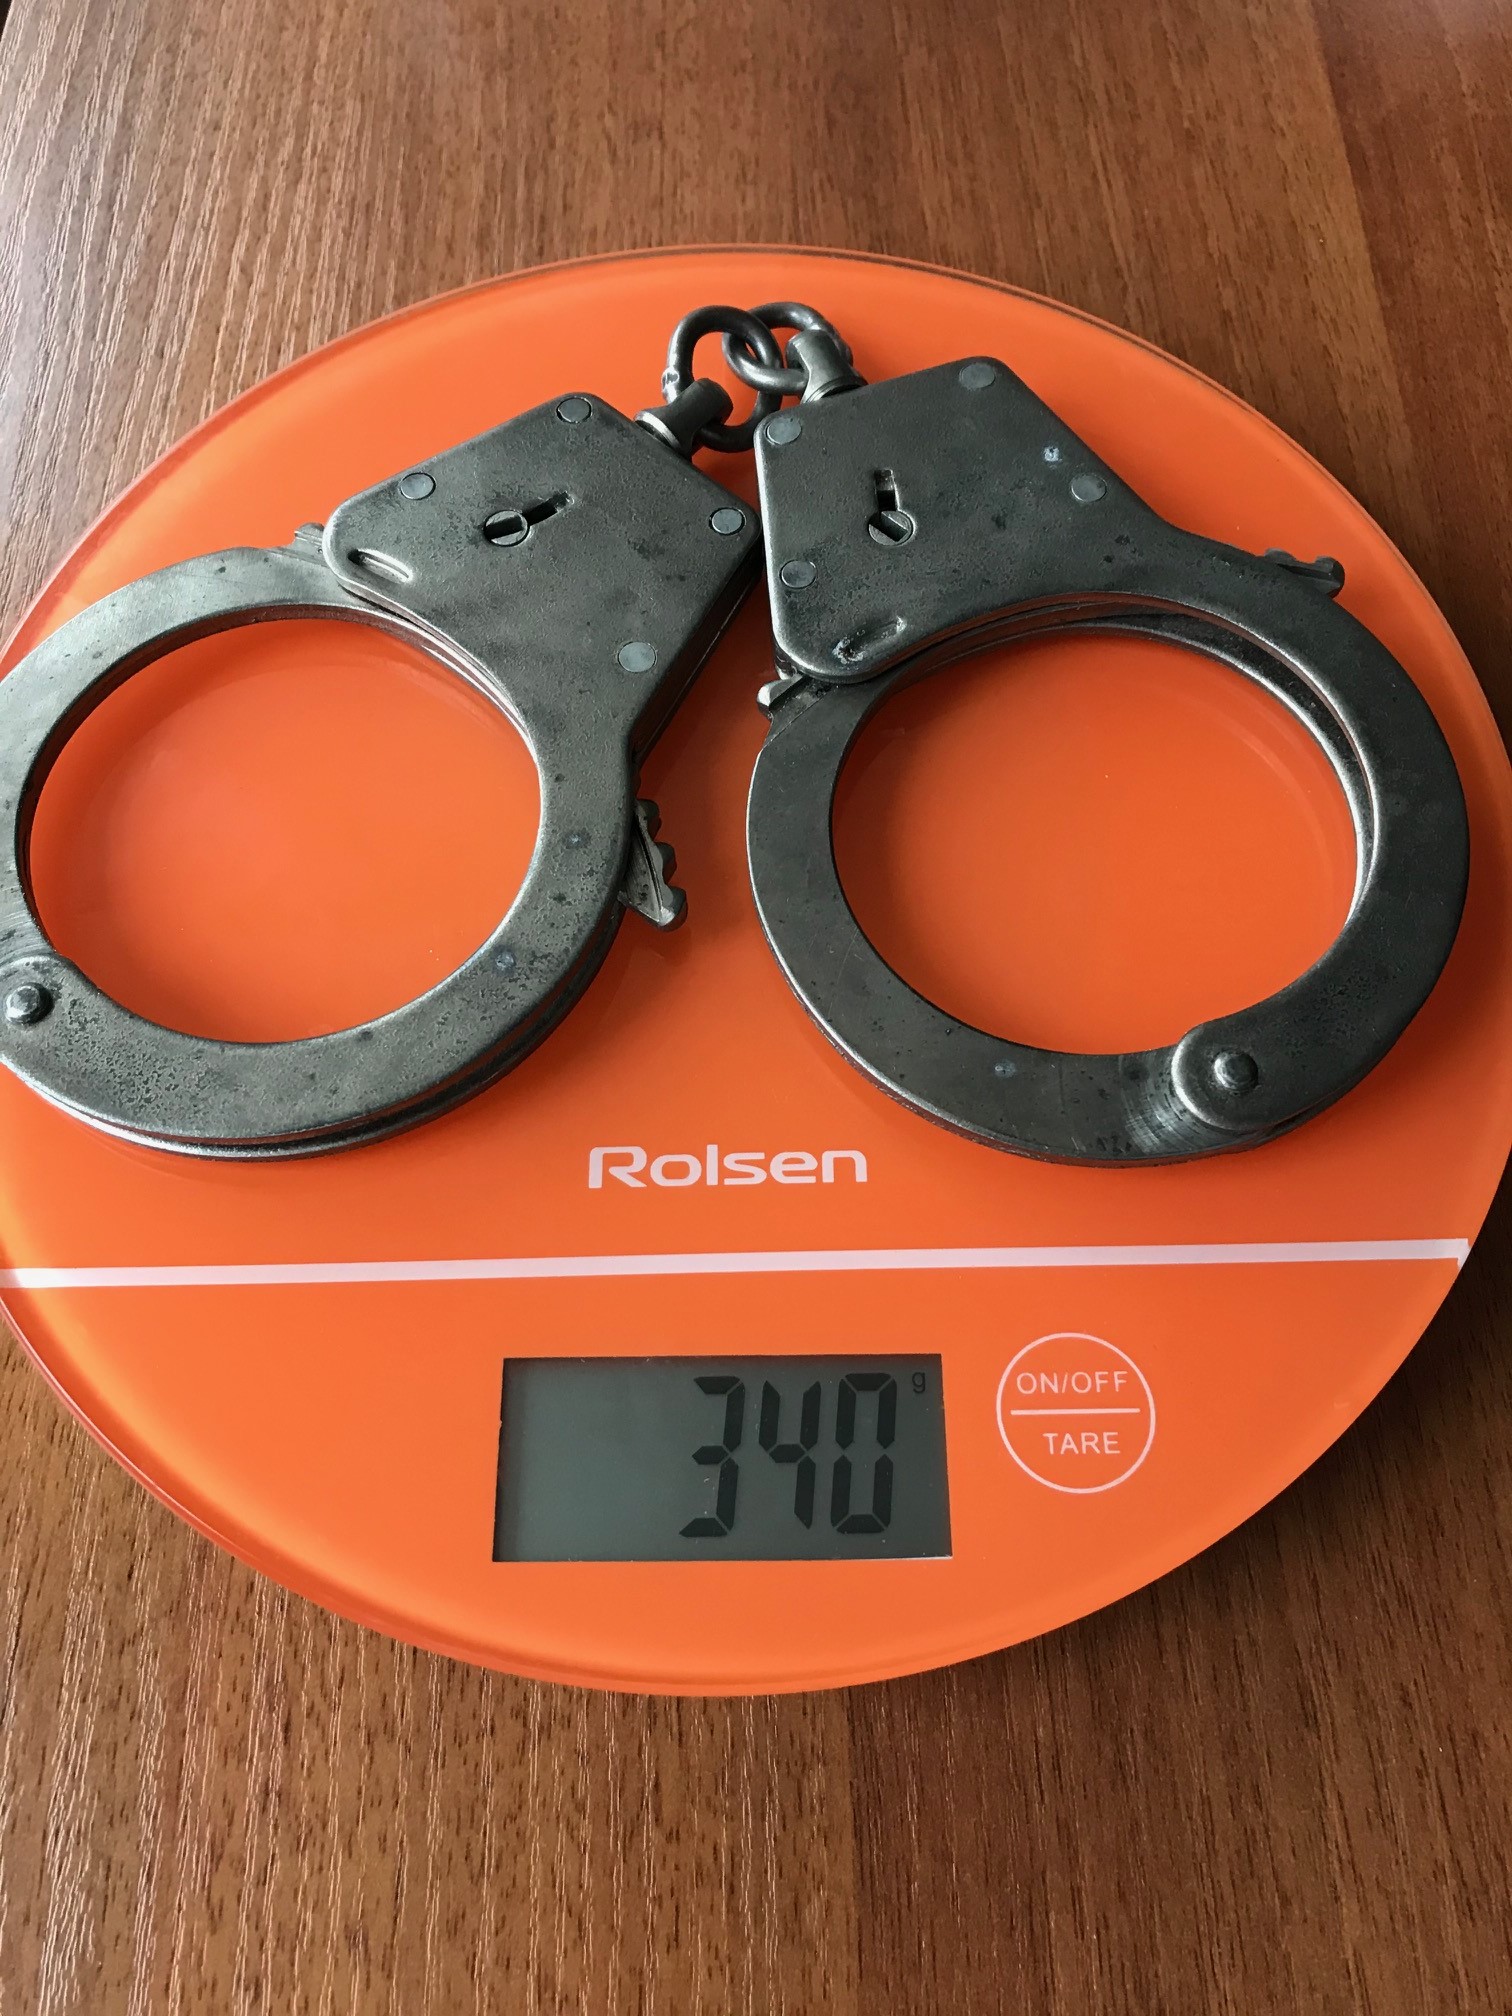 the weight of police handcuffs